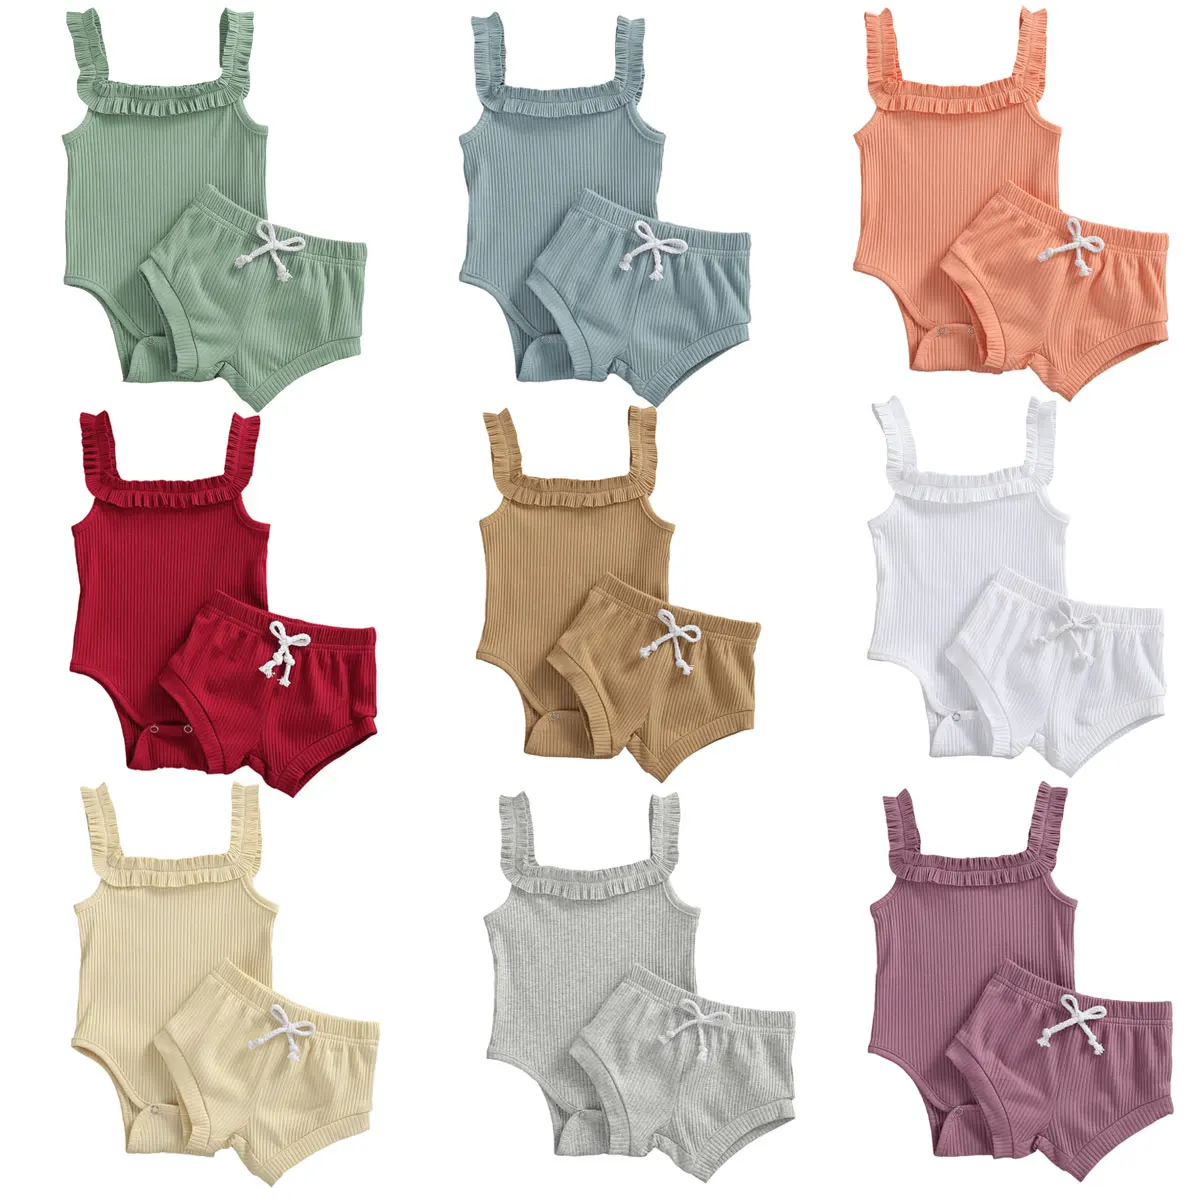 

Girls Boys Summer Baby Clothing Newbown Sleeveless Ribbed Ruffled Solid Bodysuits Jumpsuits+Shorts Pants Toddler Infant Outfits